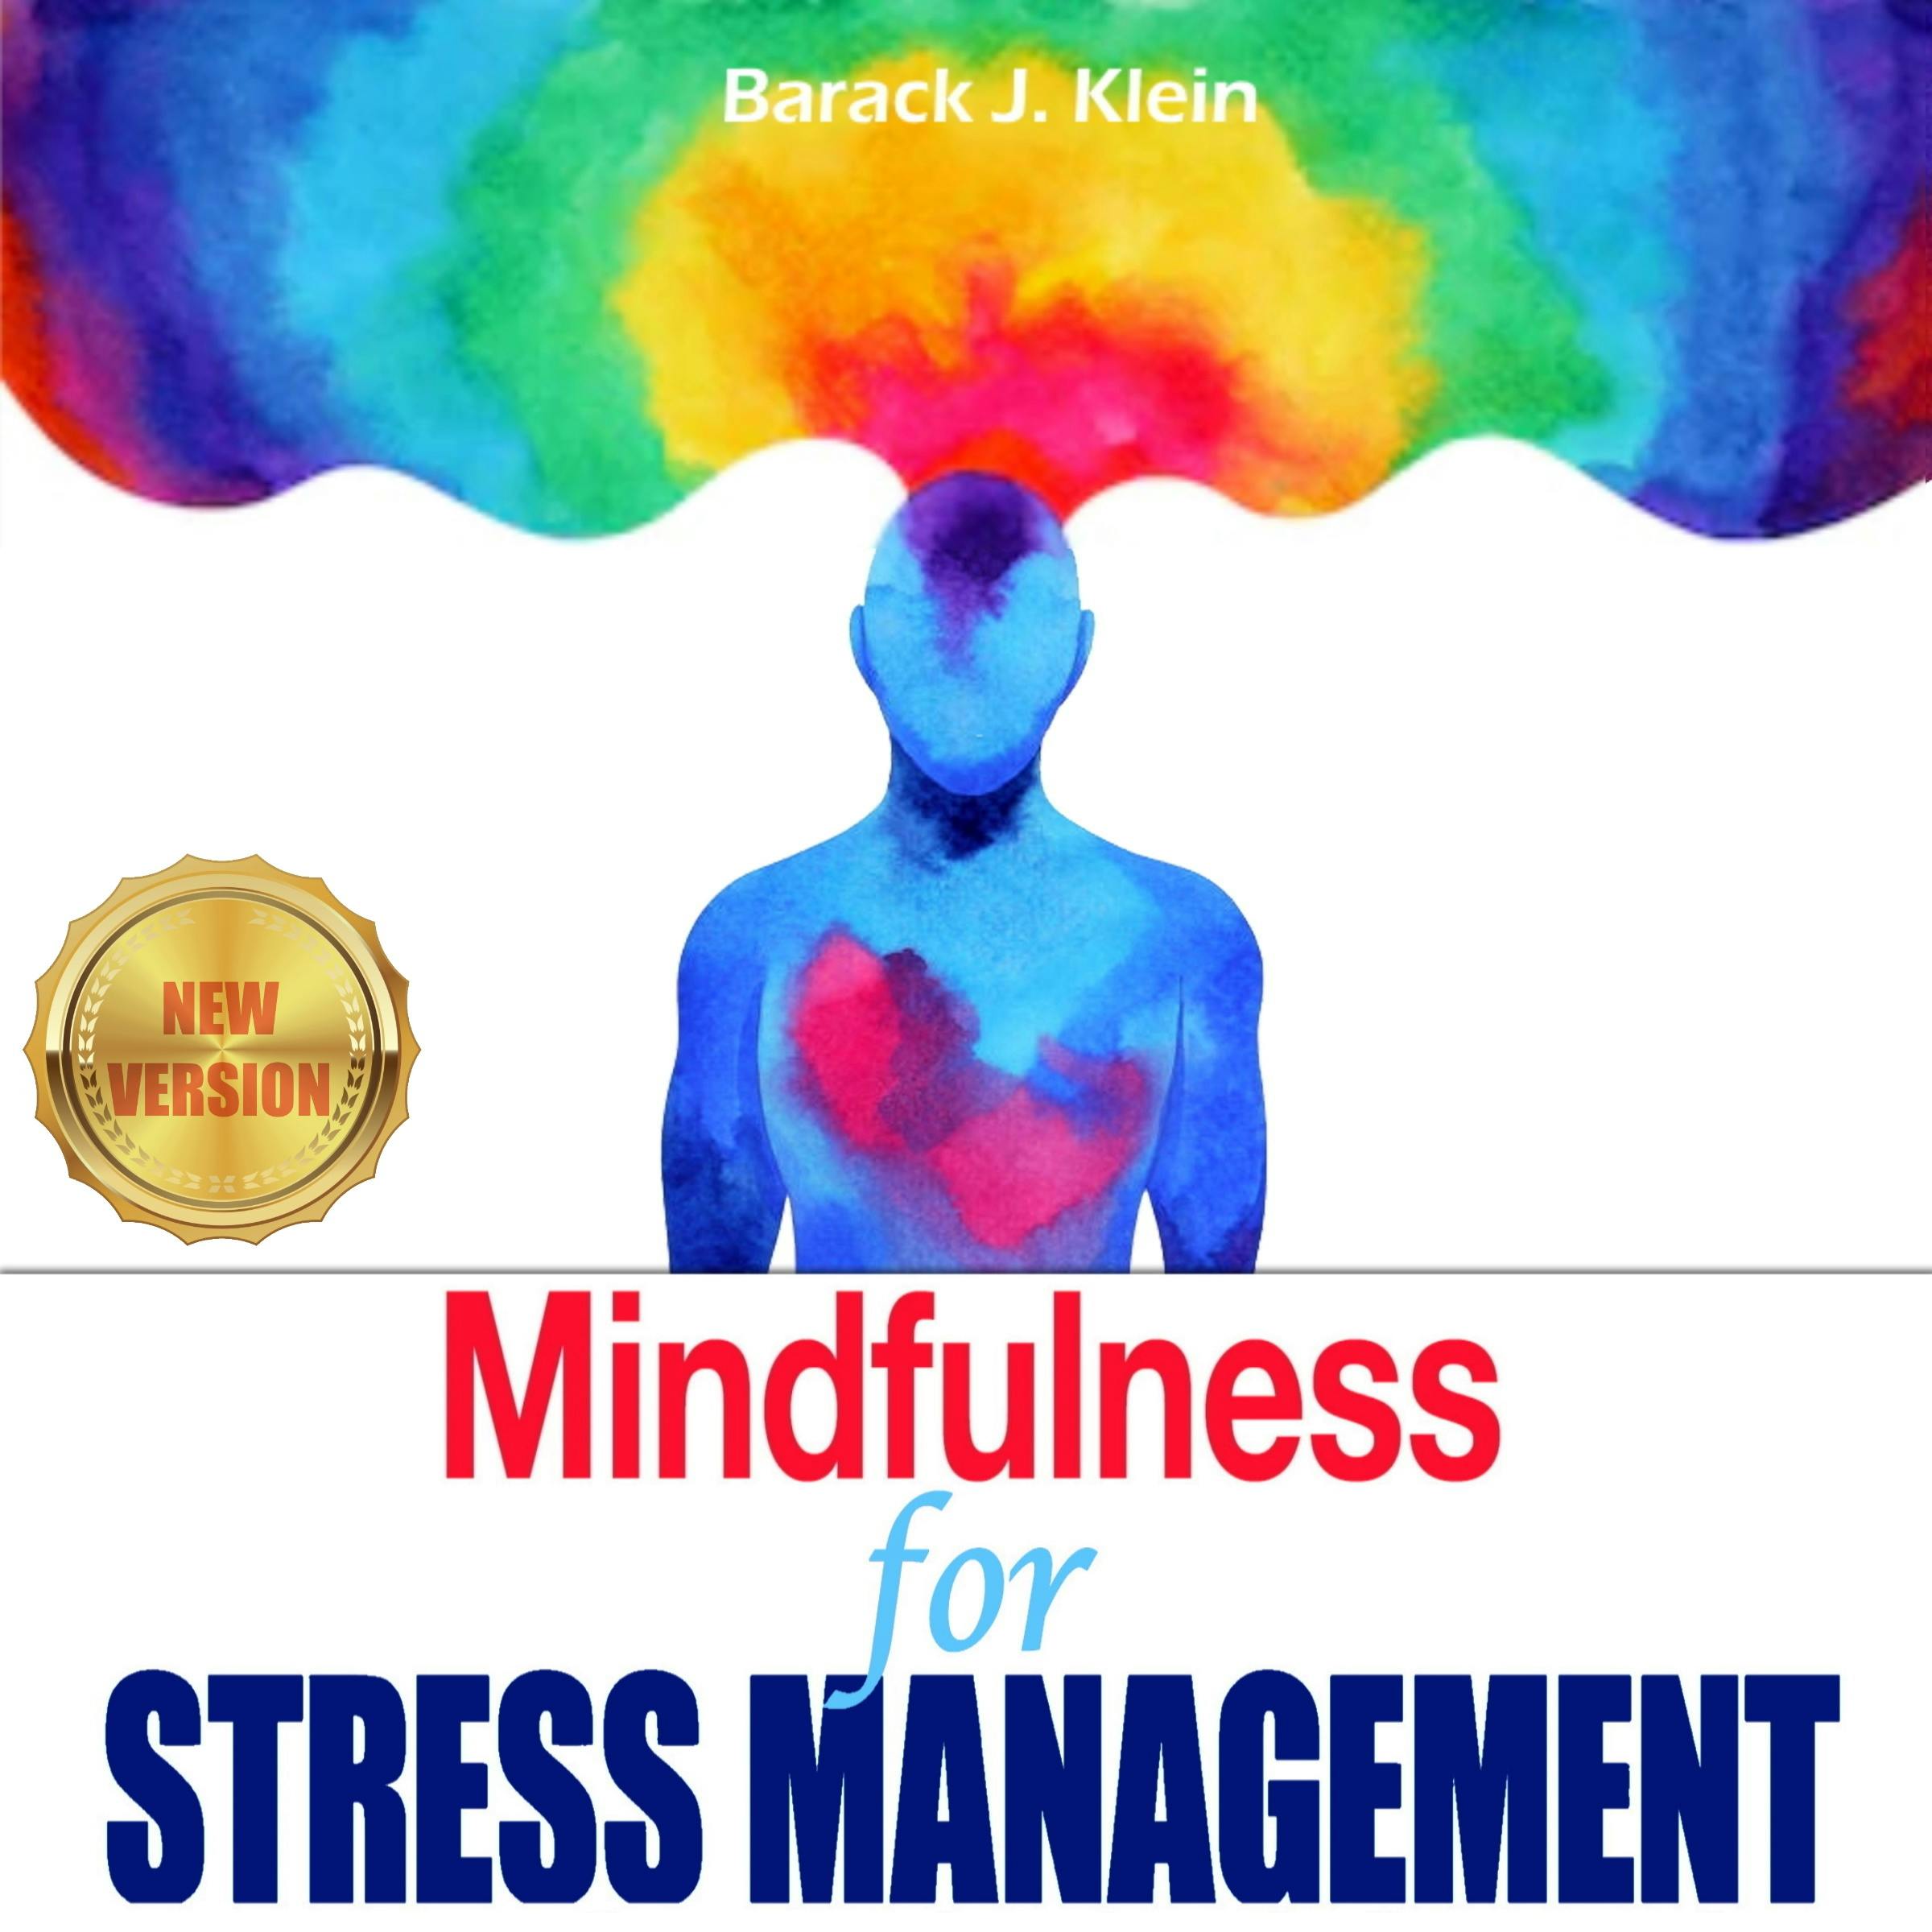 Mindfulness for STRESS MANAGEMENT: A Direct Path Through Brain Training to Overcome Panic Attacks, Anxiety, and Overcoming Stress. Anxiety Relief, Give Up Negative Thinking. NEW VERSION - BARACK J. KLEIN